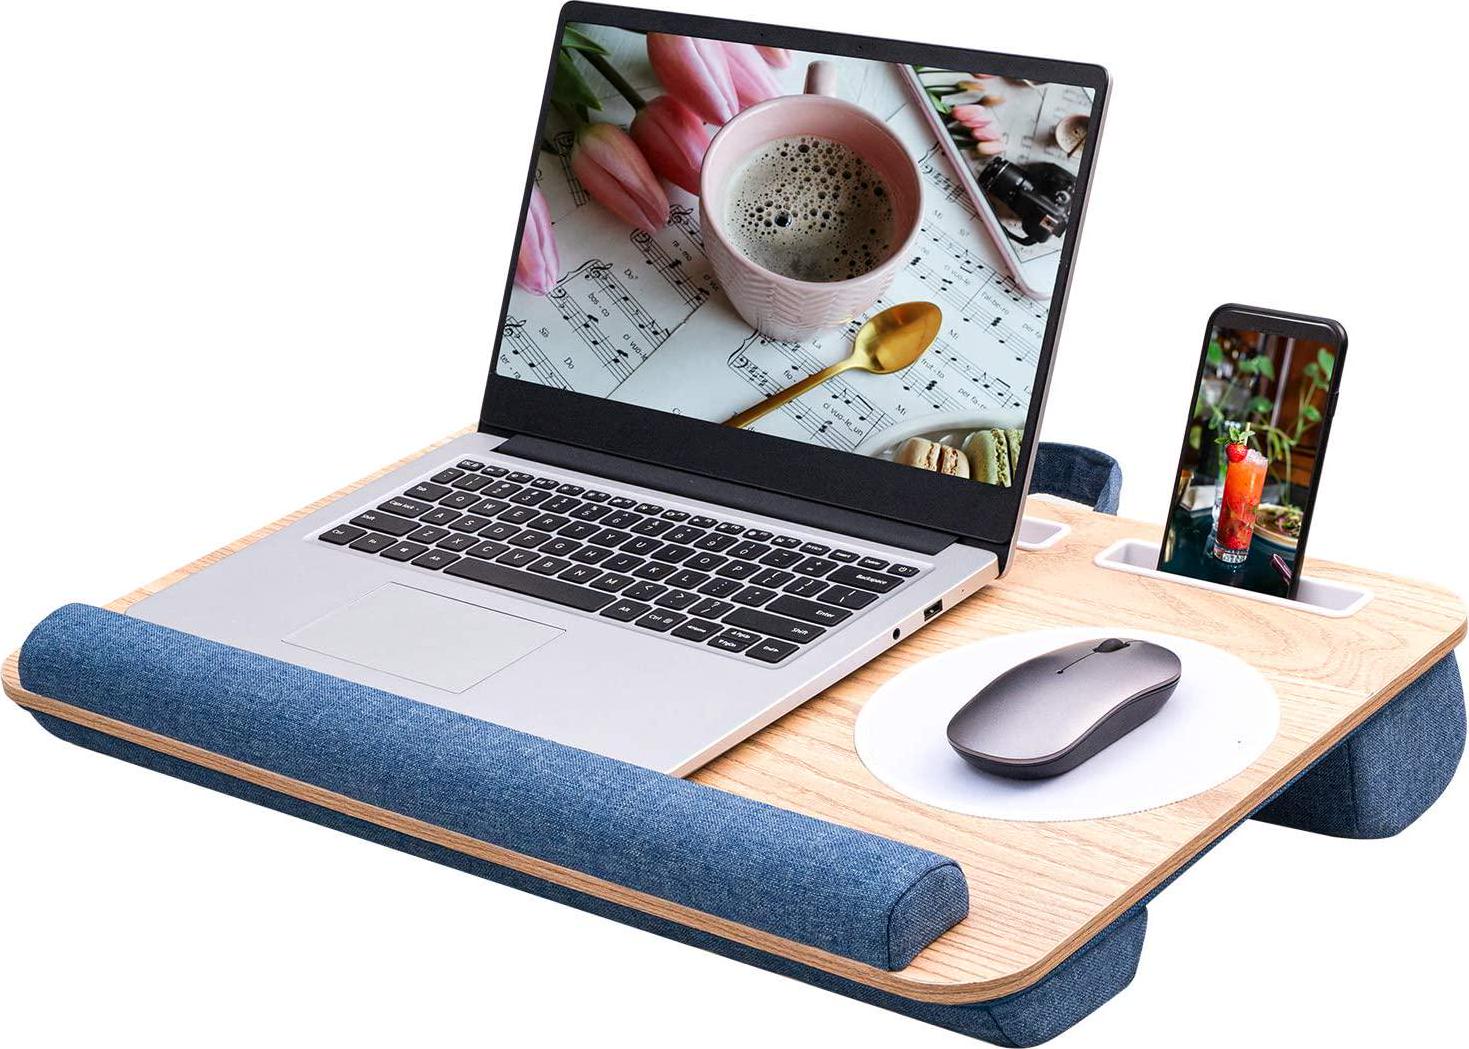 furduzz, Laptop Desk -Portable Lap Desk with Cushion Mouse Pad Pen Tablet Phone Holder Fits Up to 17 Inch Laptop Tray for Students Home Office Bed Sofa Car-Blue